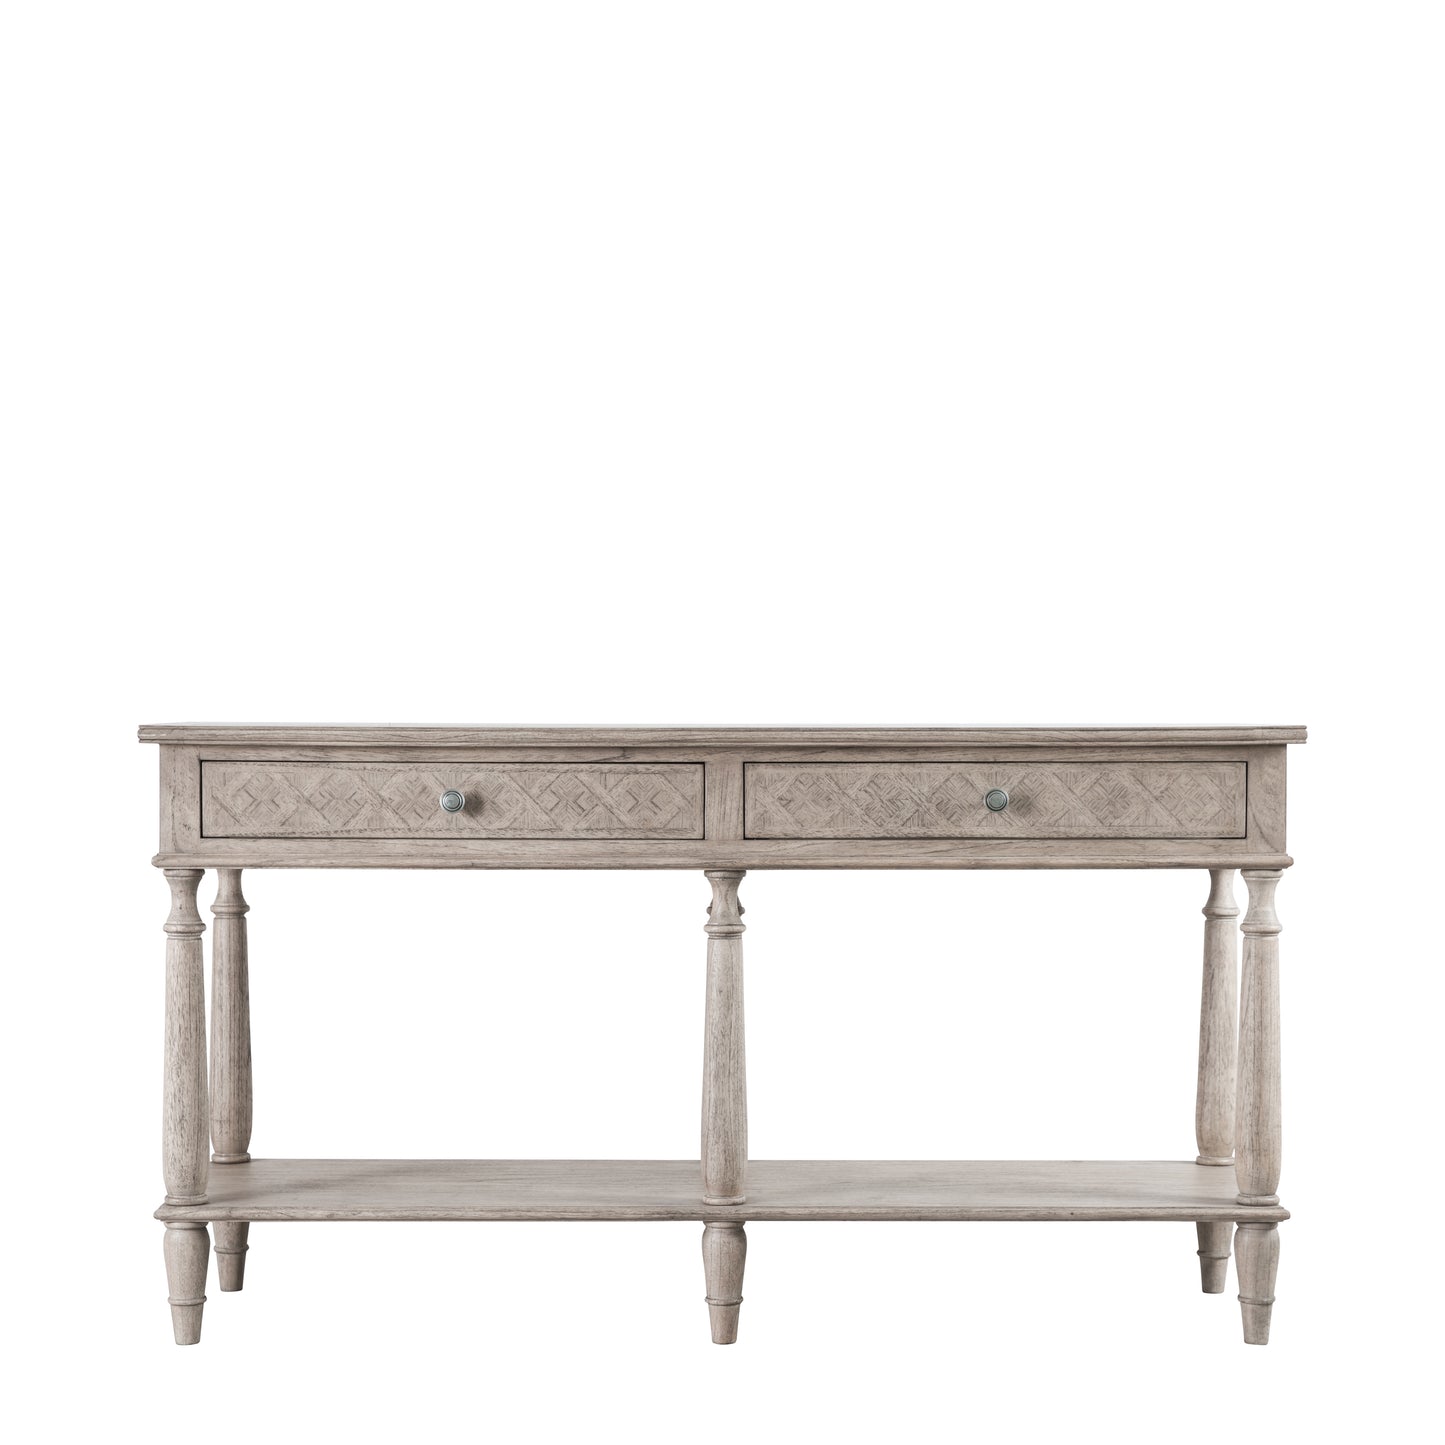 A Belsford 2 Drawer Console Table from Kikiathome.co.uk for interior decor.